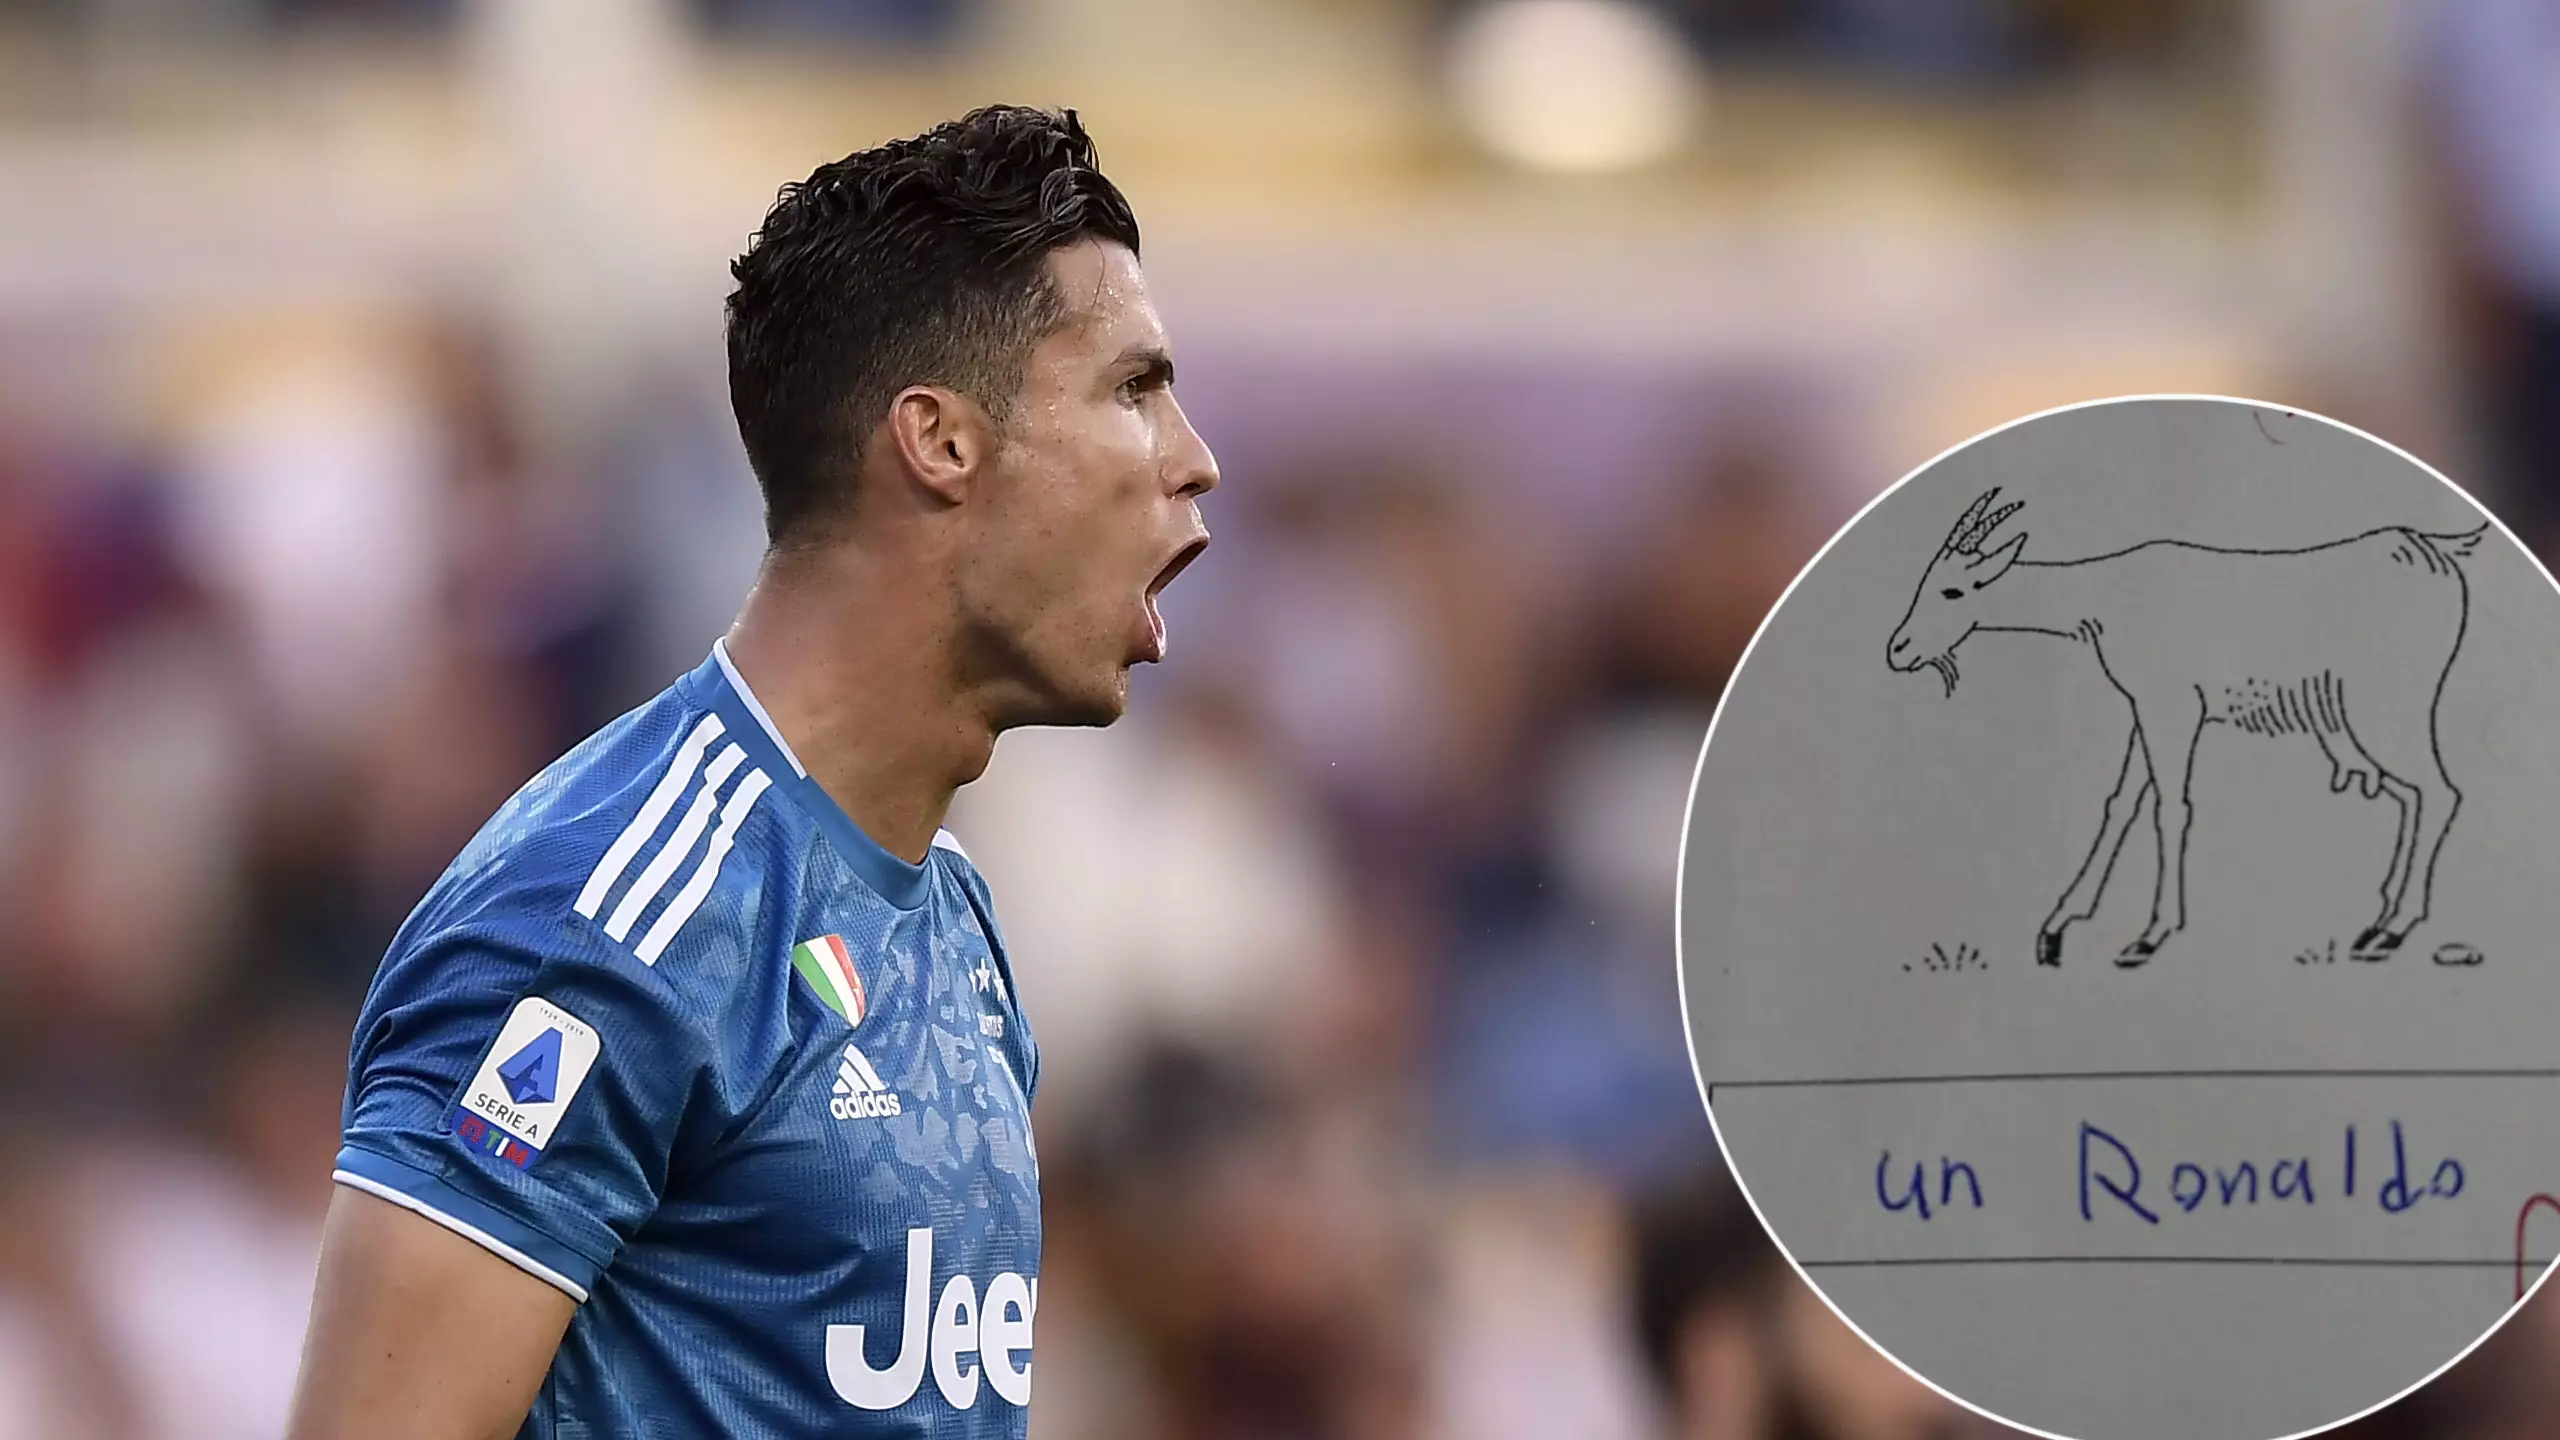 Student Translates 'The Goat' As Cristiano Ronaldo In French Exam